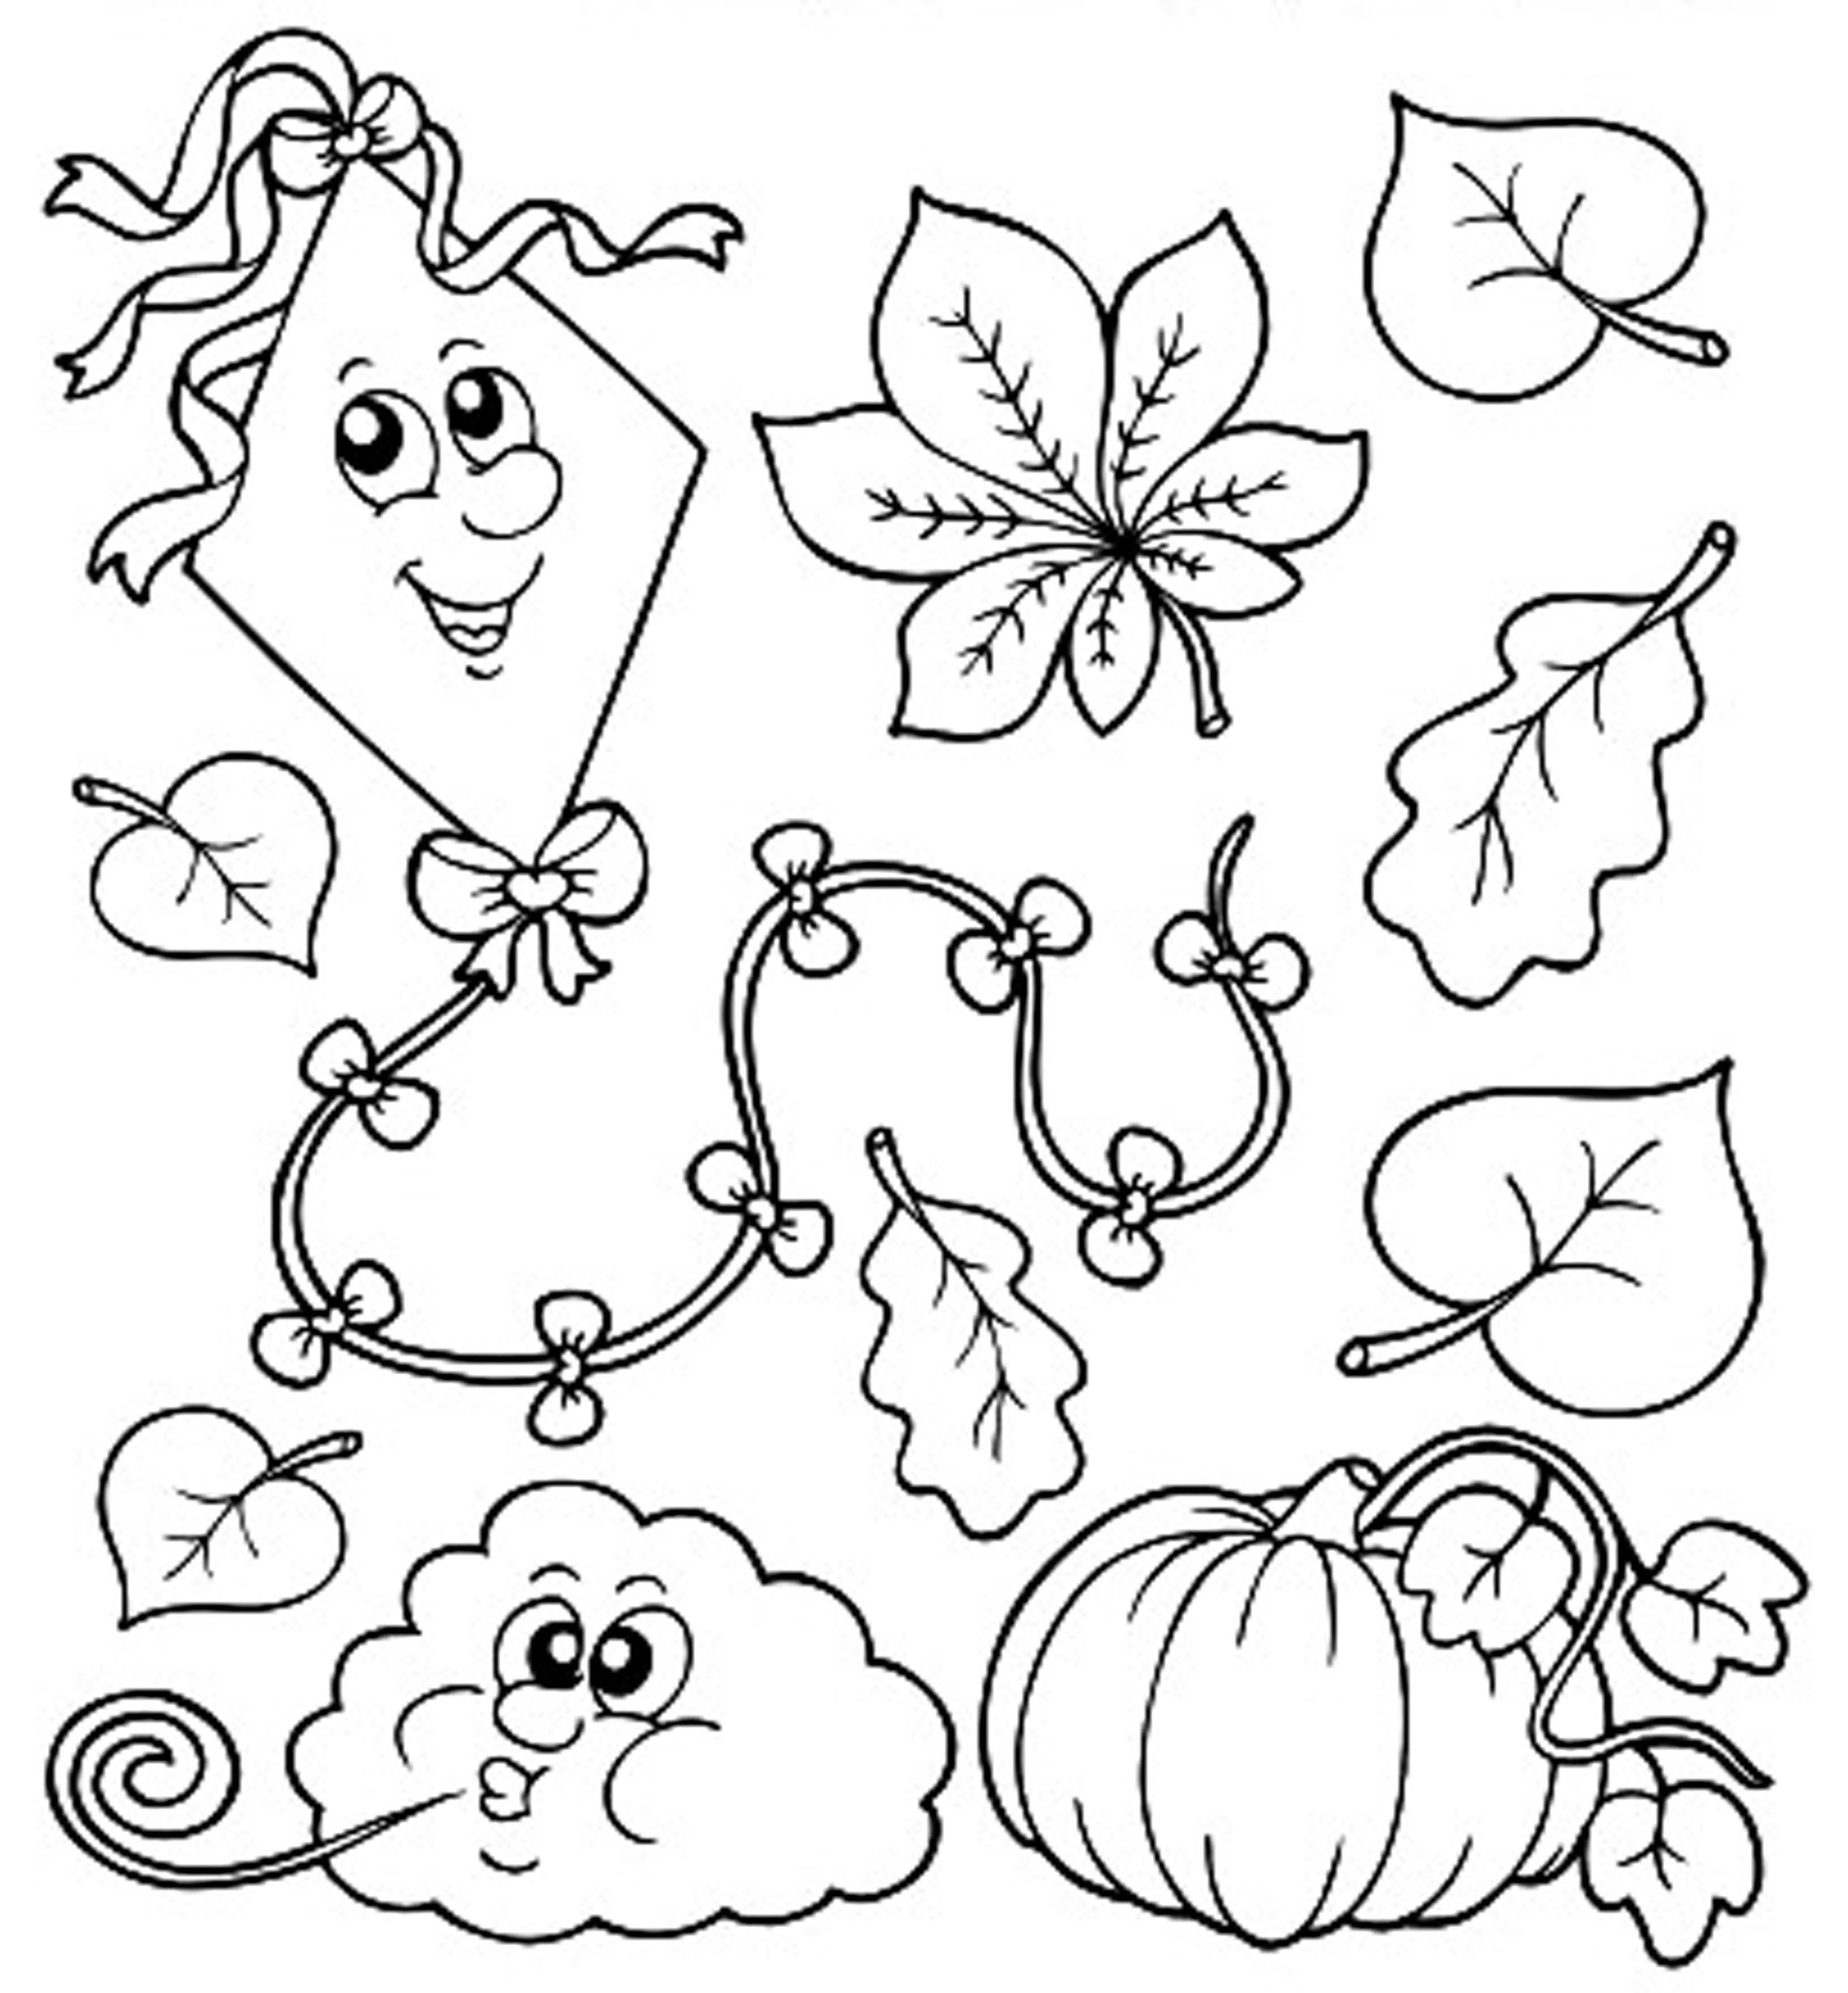 Autumn Coloring Pages For Kids at Free printable